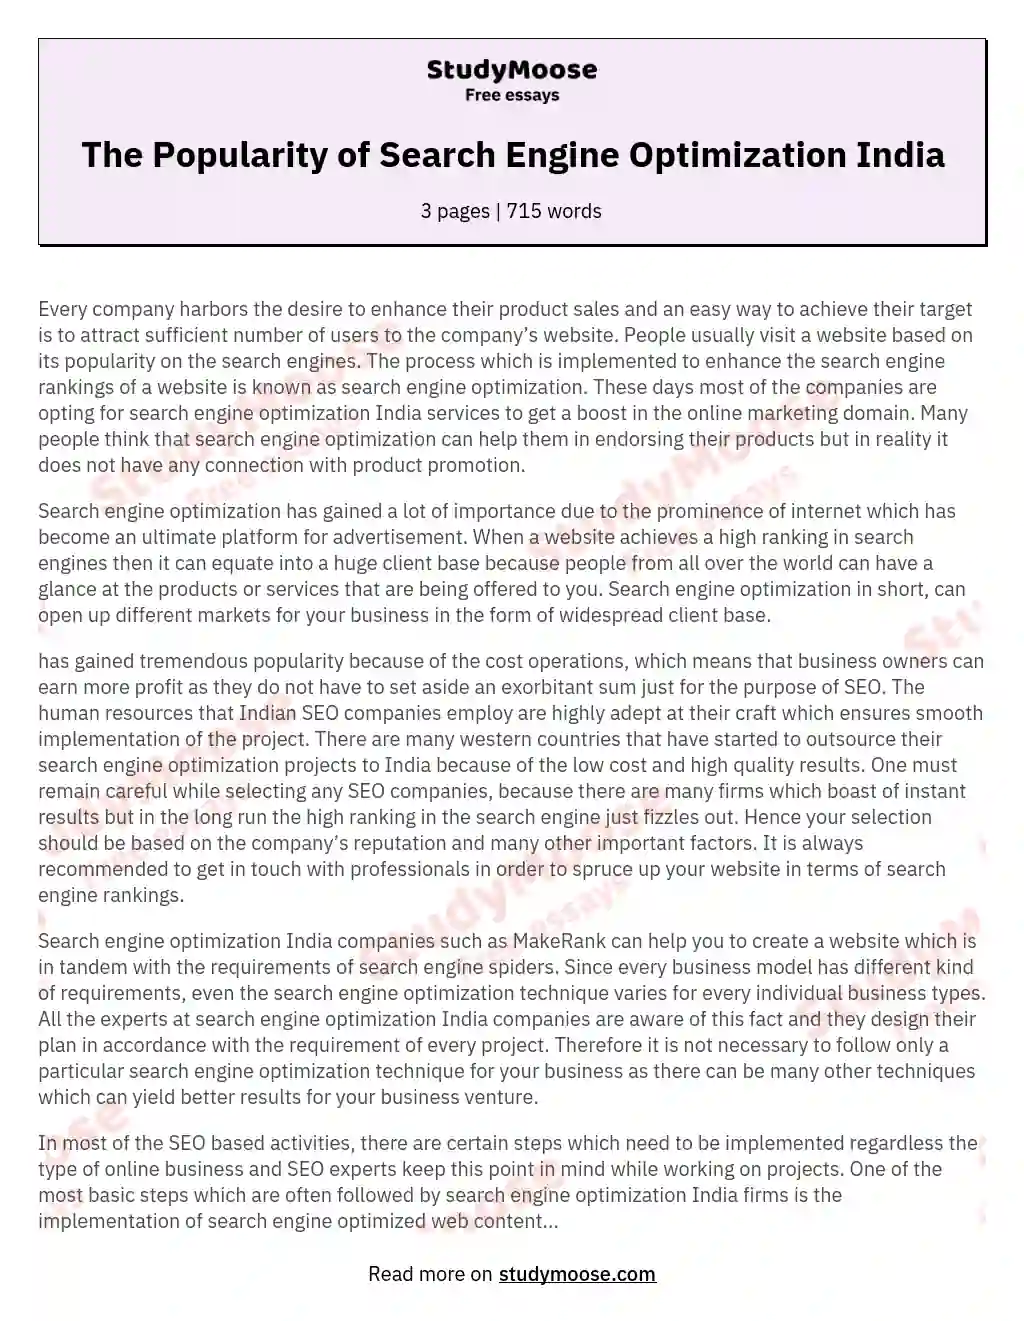 The Popularity of Search Engine Optimization India essay